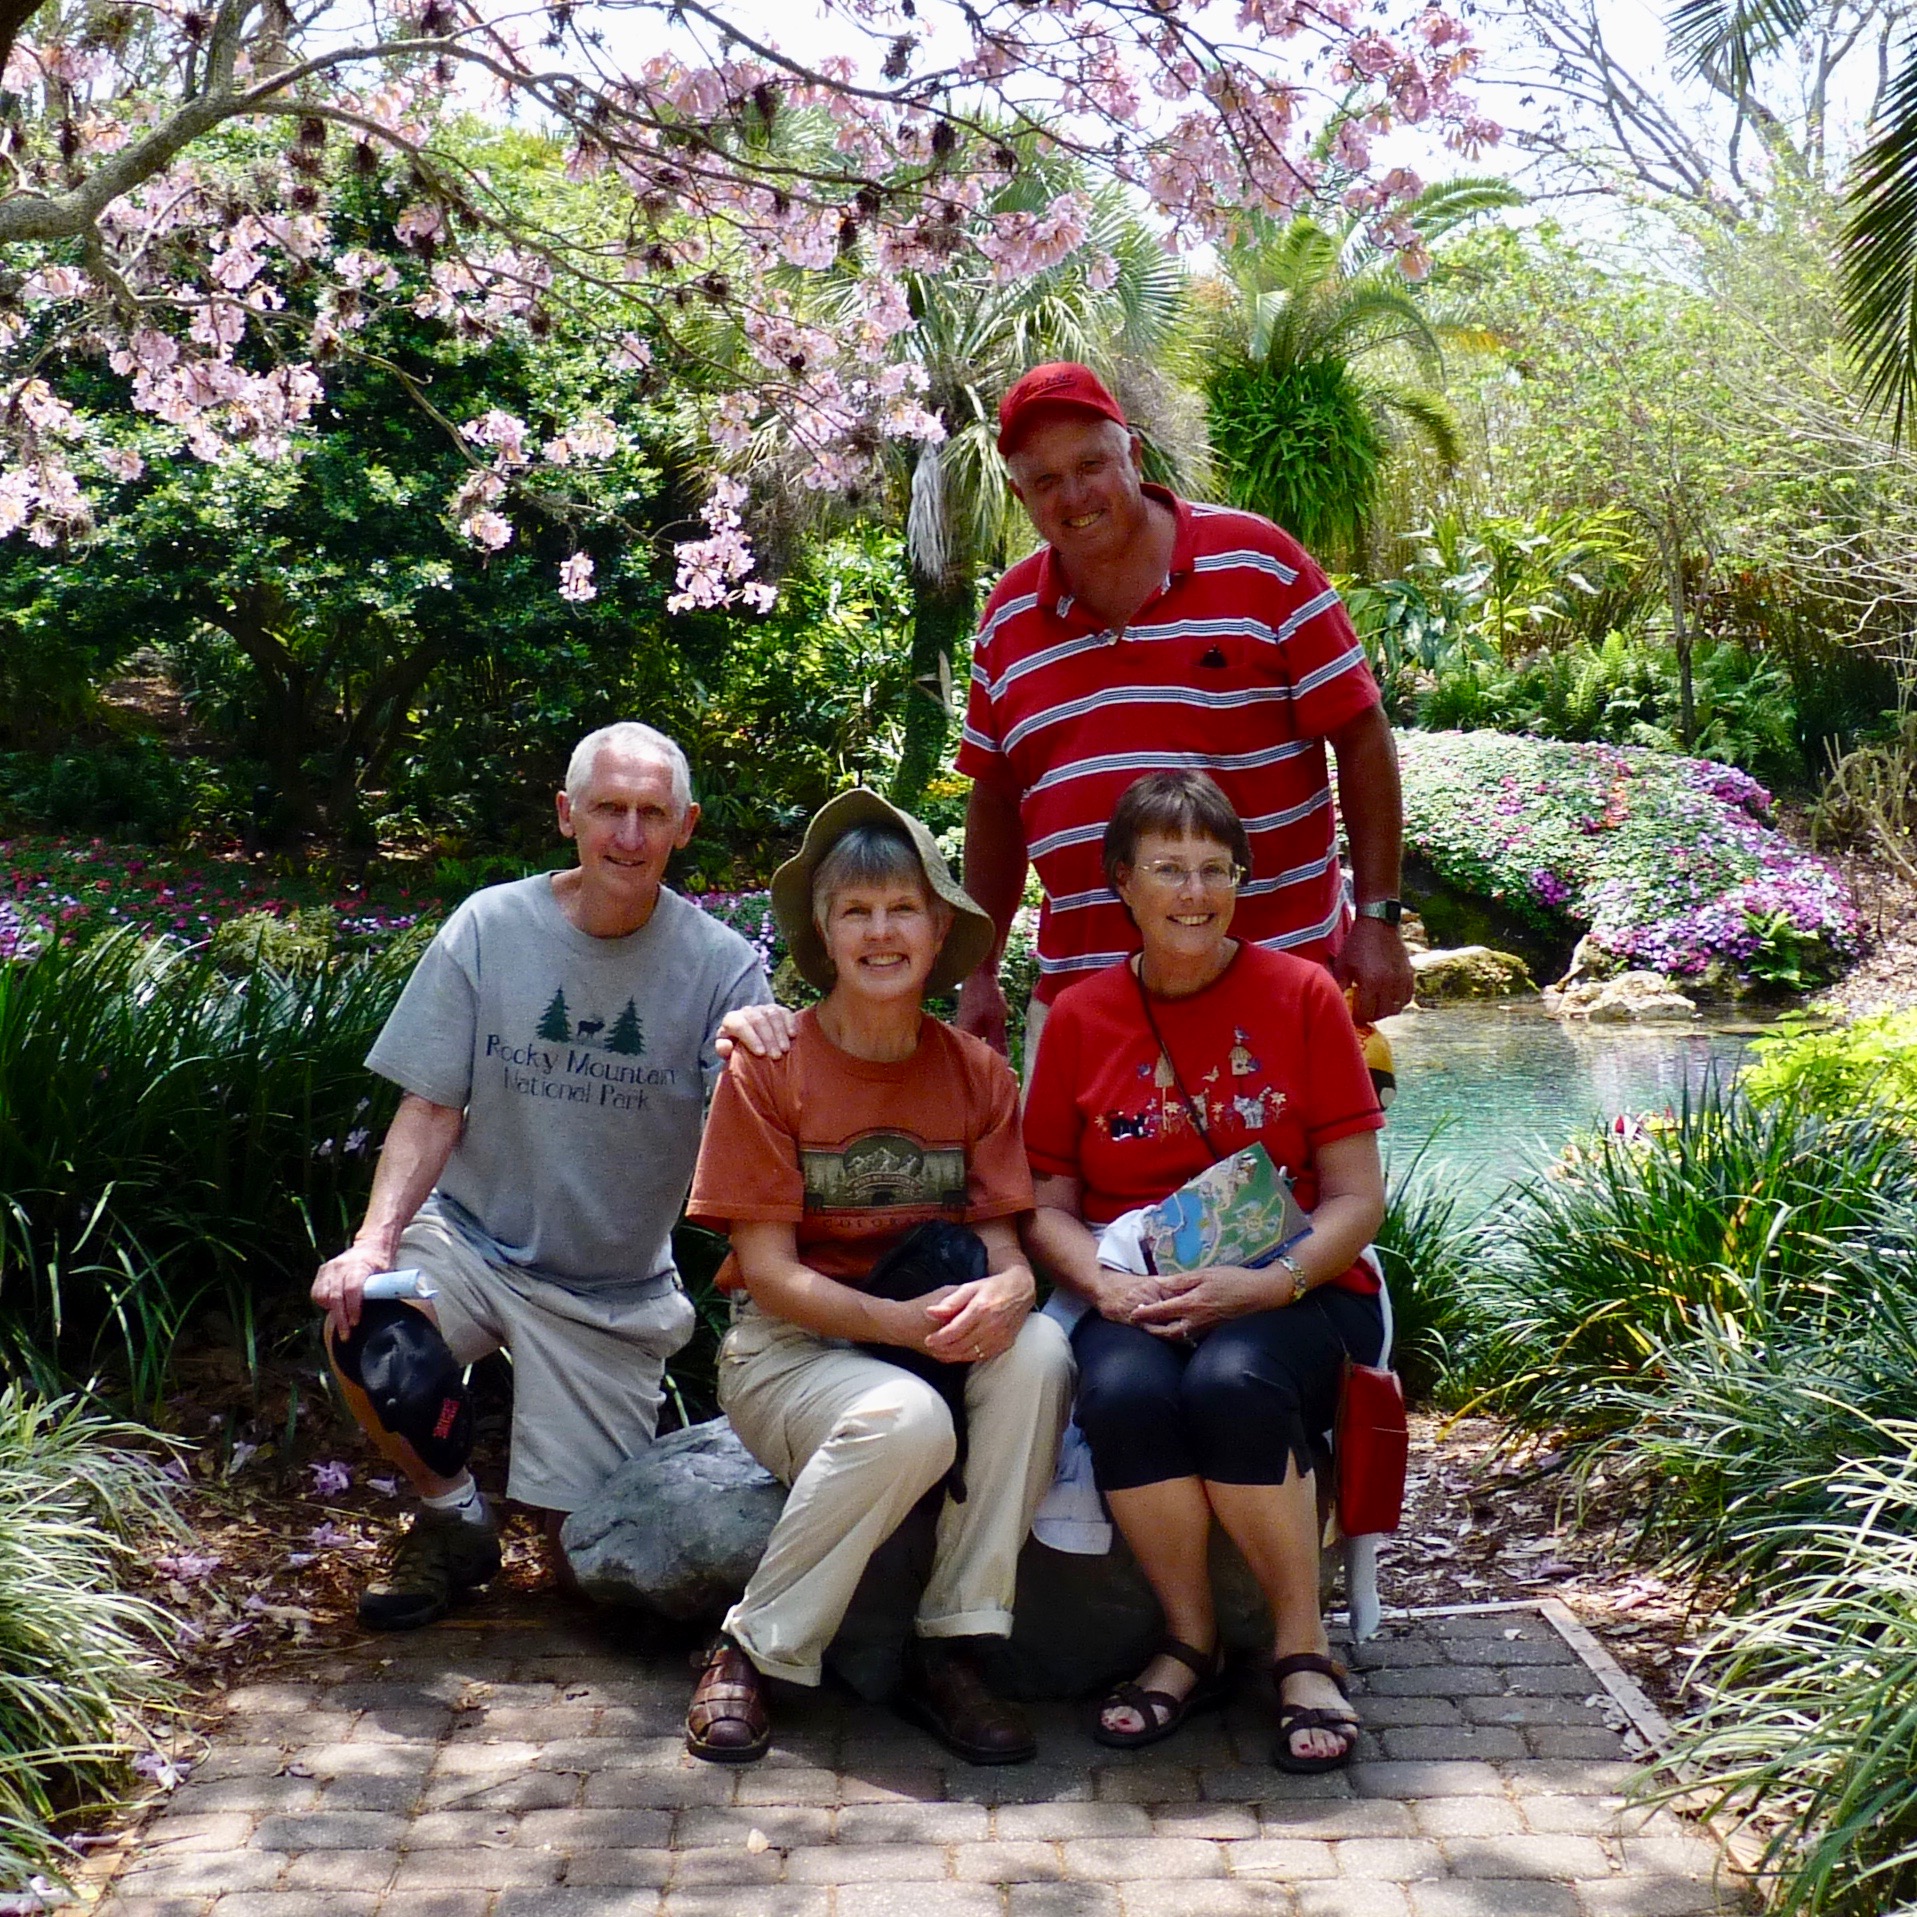 Here's Art on a beautiful Florida day at Sea World with Jim, Gini, and Diane.  A precious memory.